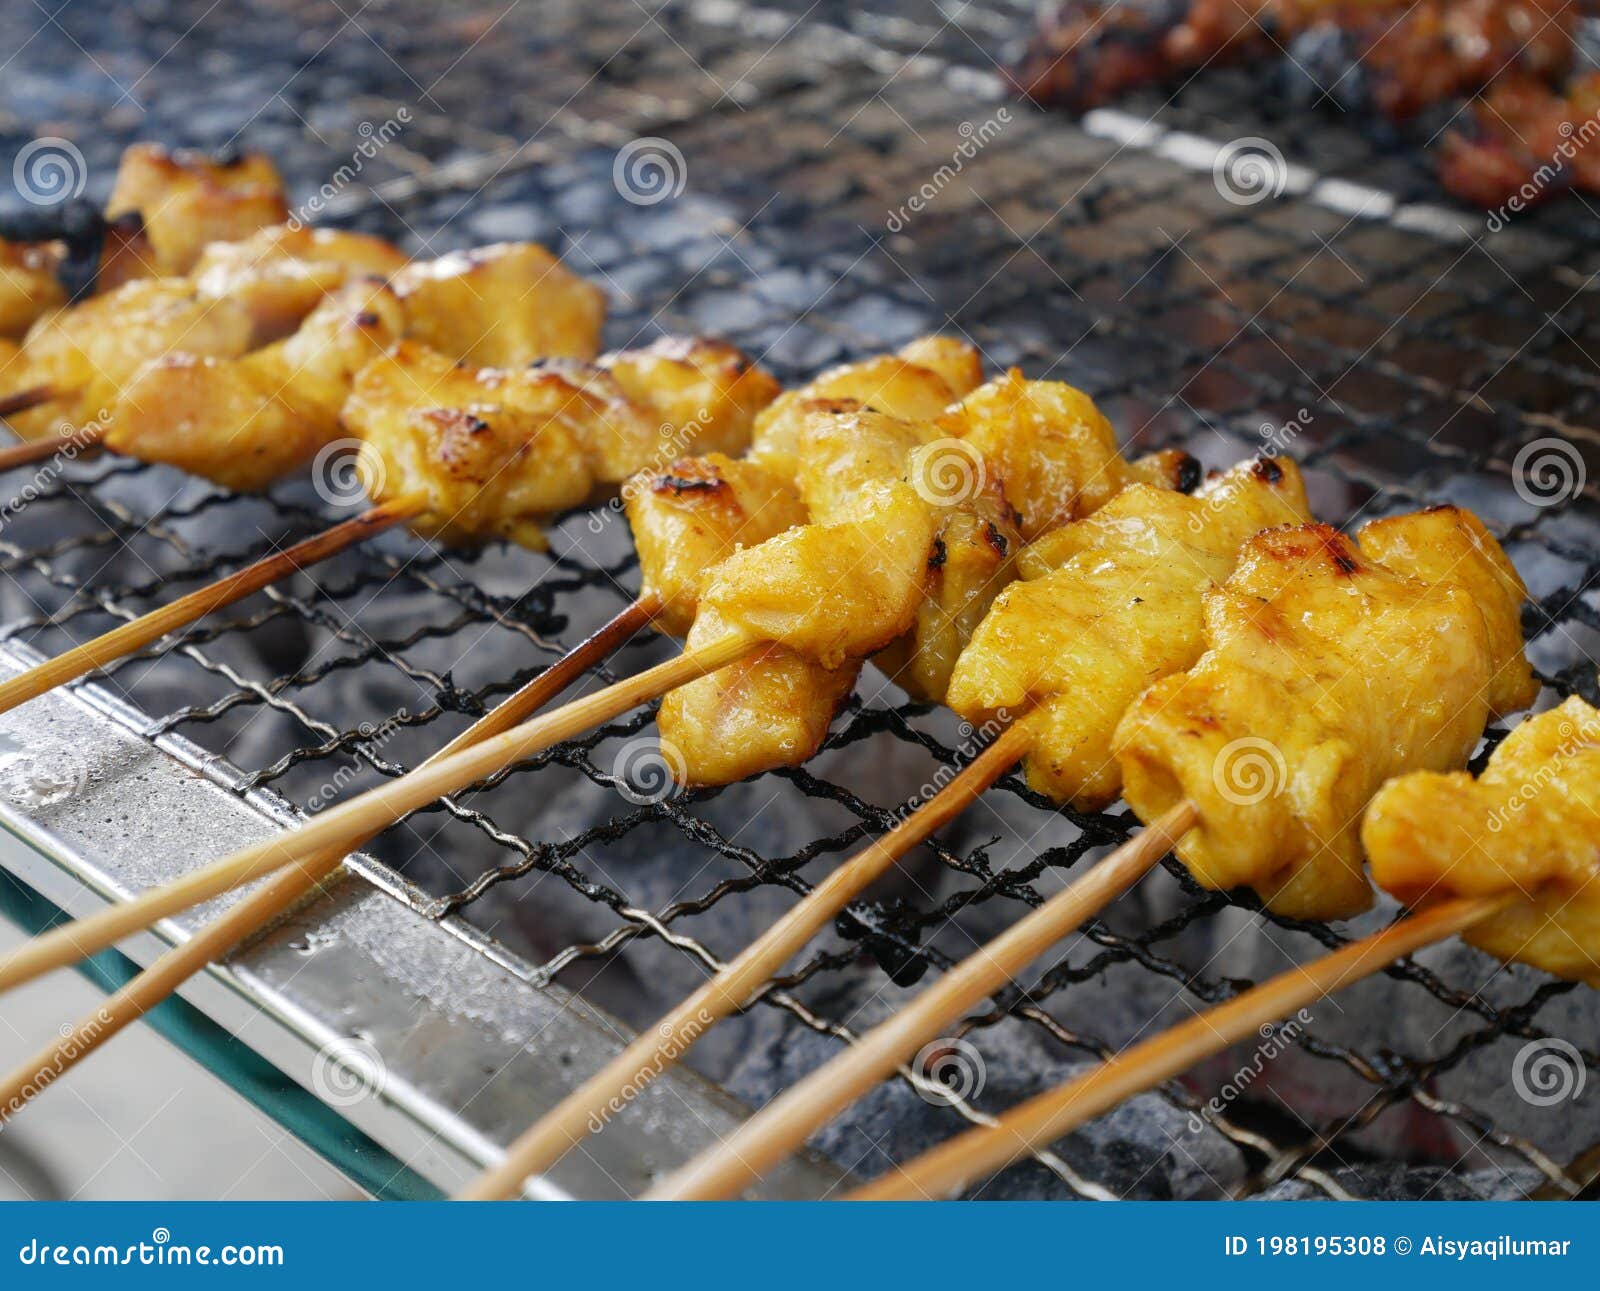 Malaysian Famous Traditional Food Called Sate Meat Or Chicken Marinated With Mix Spices And Grill Using Hot Charcoal Stock Photo Image Of Charcoal Malay 198195308